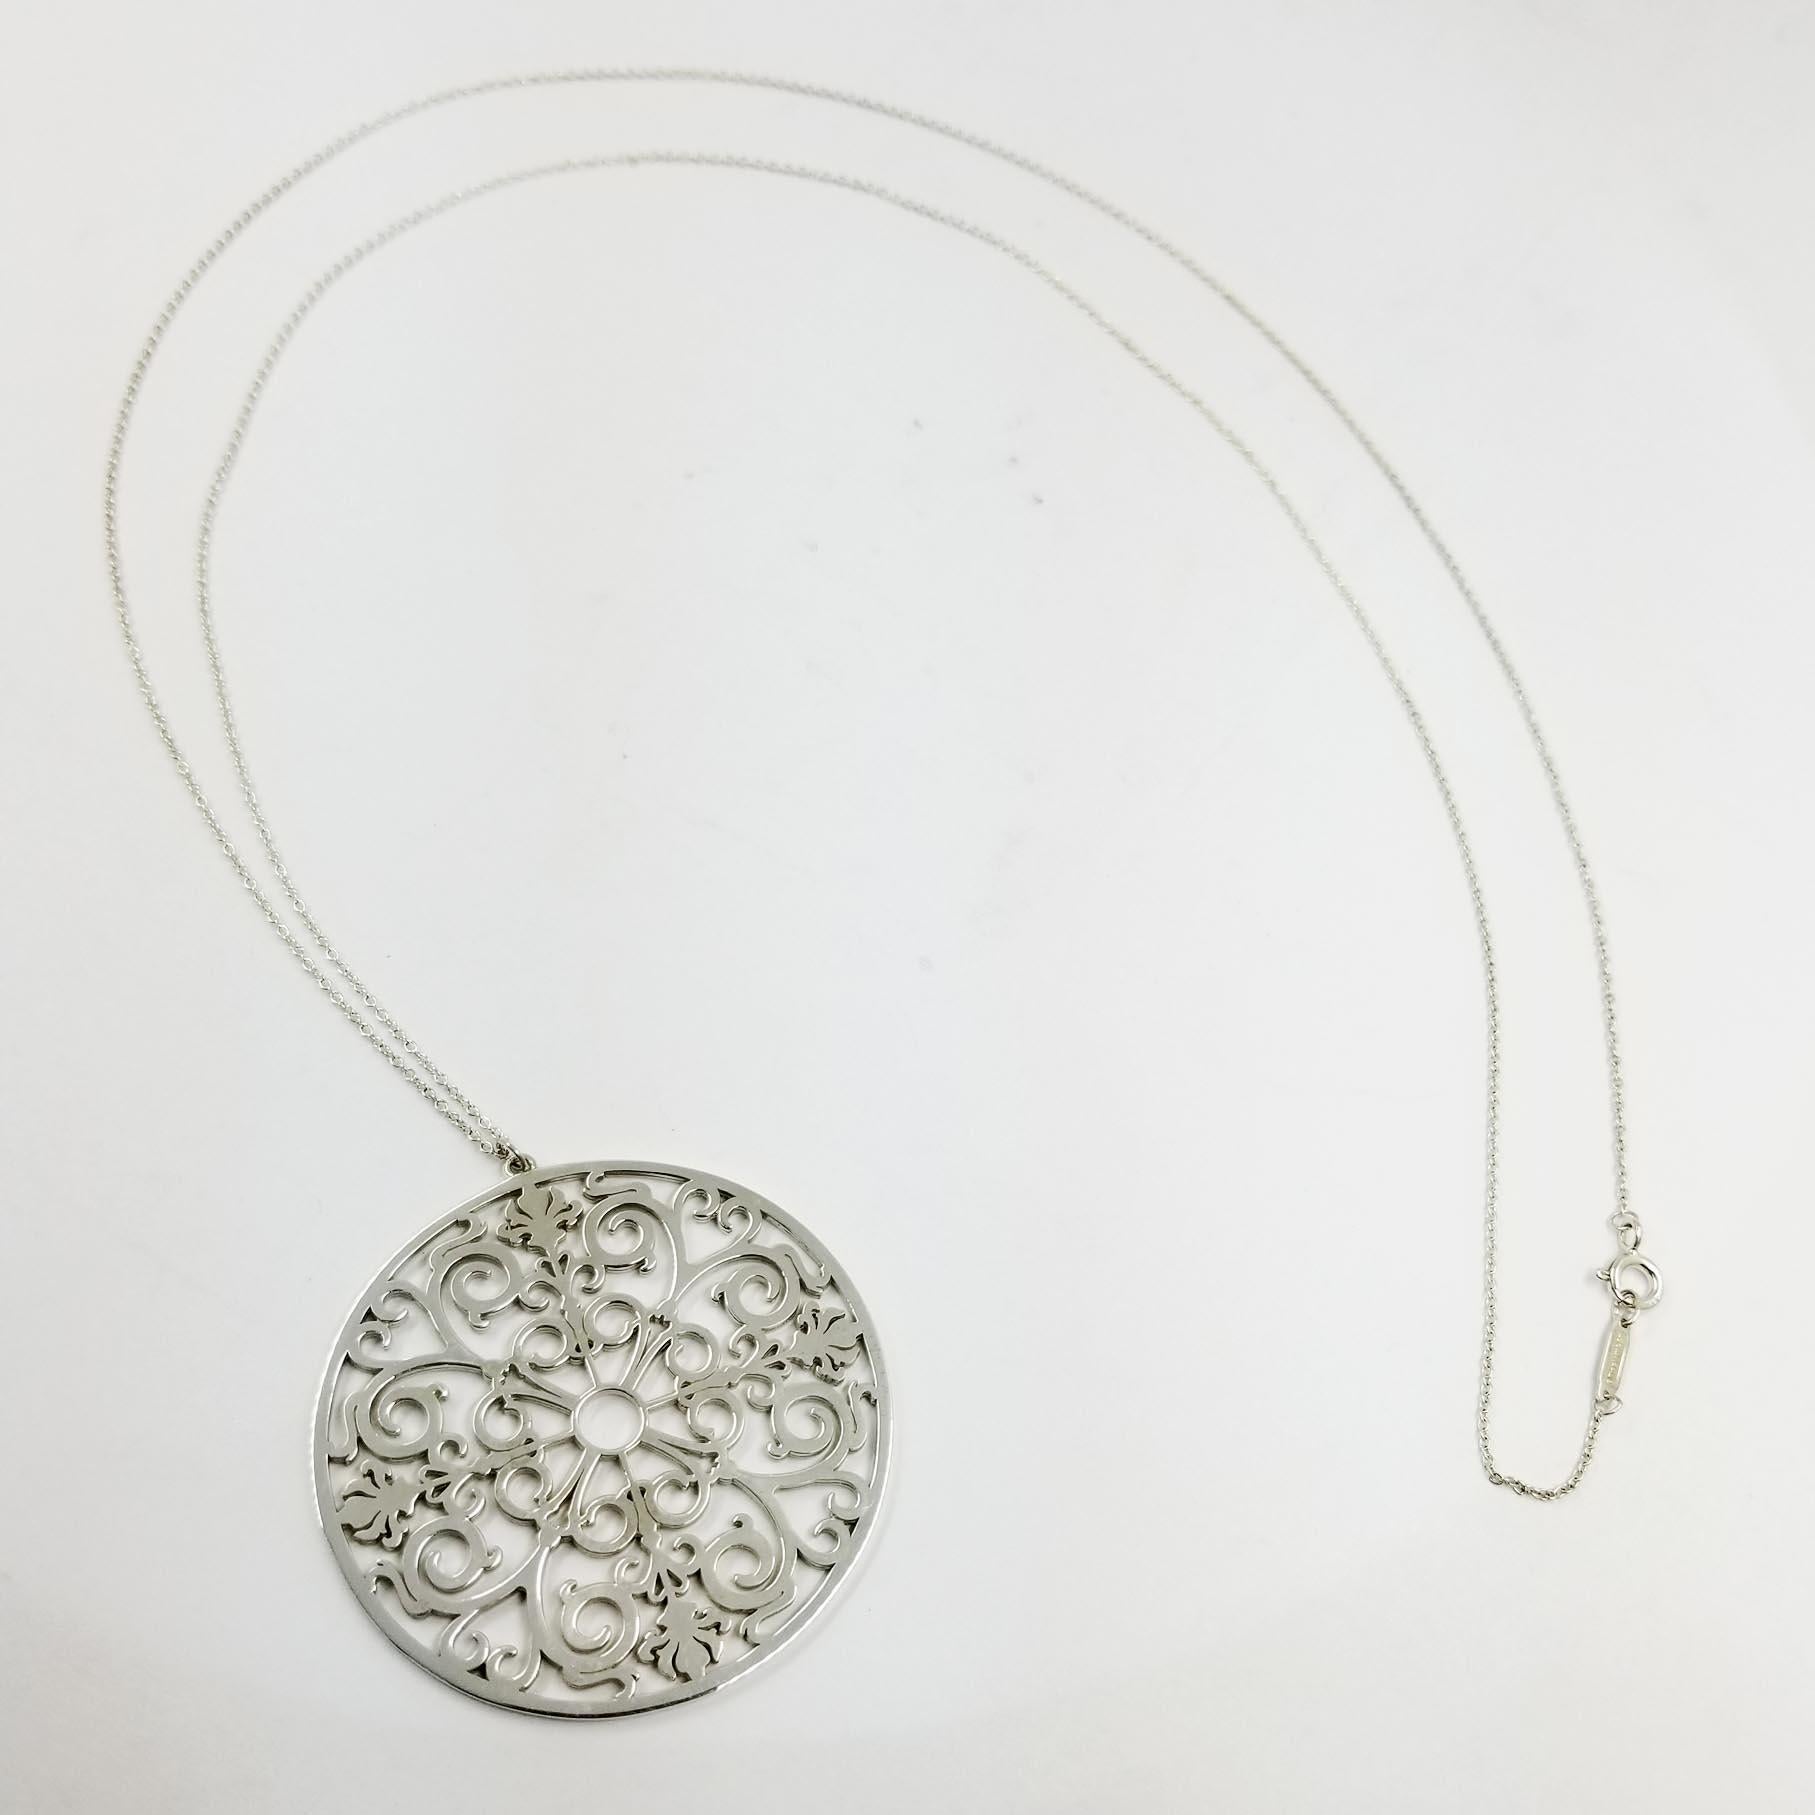 This sterling silver medallion necklace is designed by Tiffany & Co. The thin 30 inch chain is marked AG925 TIFFANY&Co. The pendant is designed with open scroll work, and measures approximately 2 inches in diameter. It has been professionally